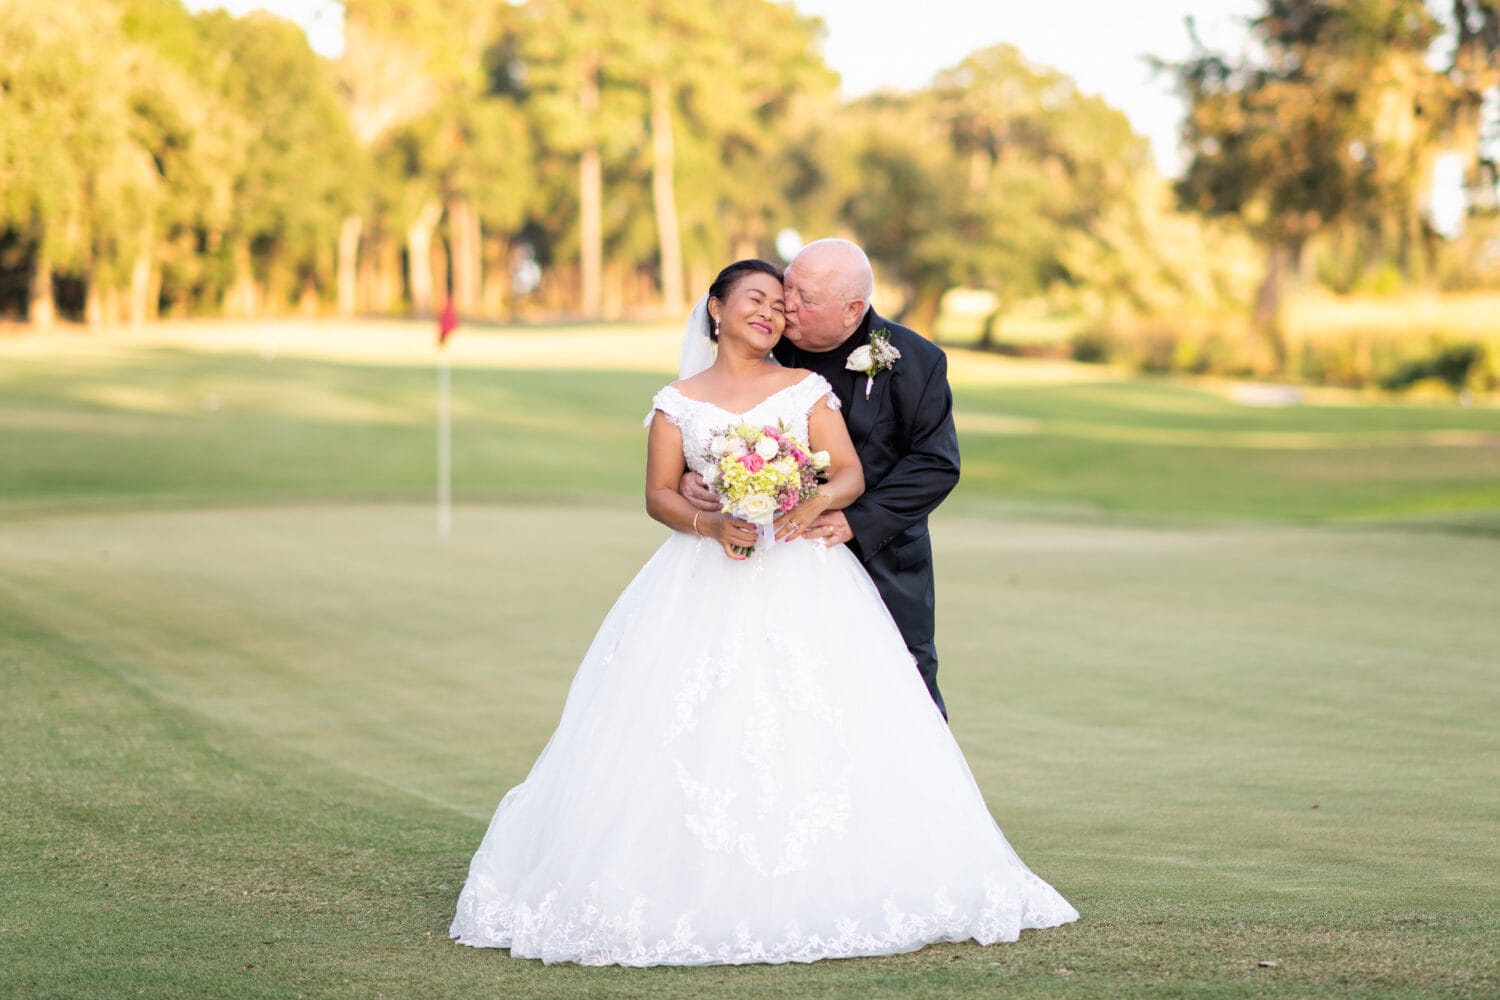 Senior couple getting married on the golf course - Pawleys Plantation